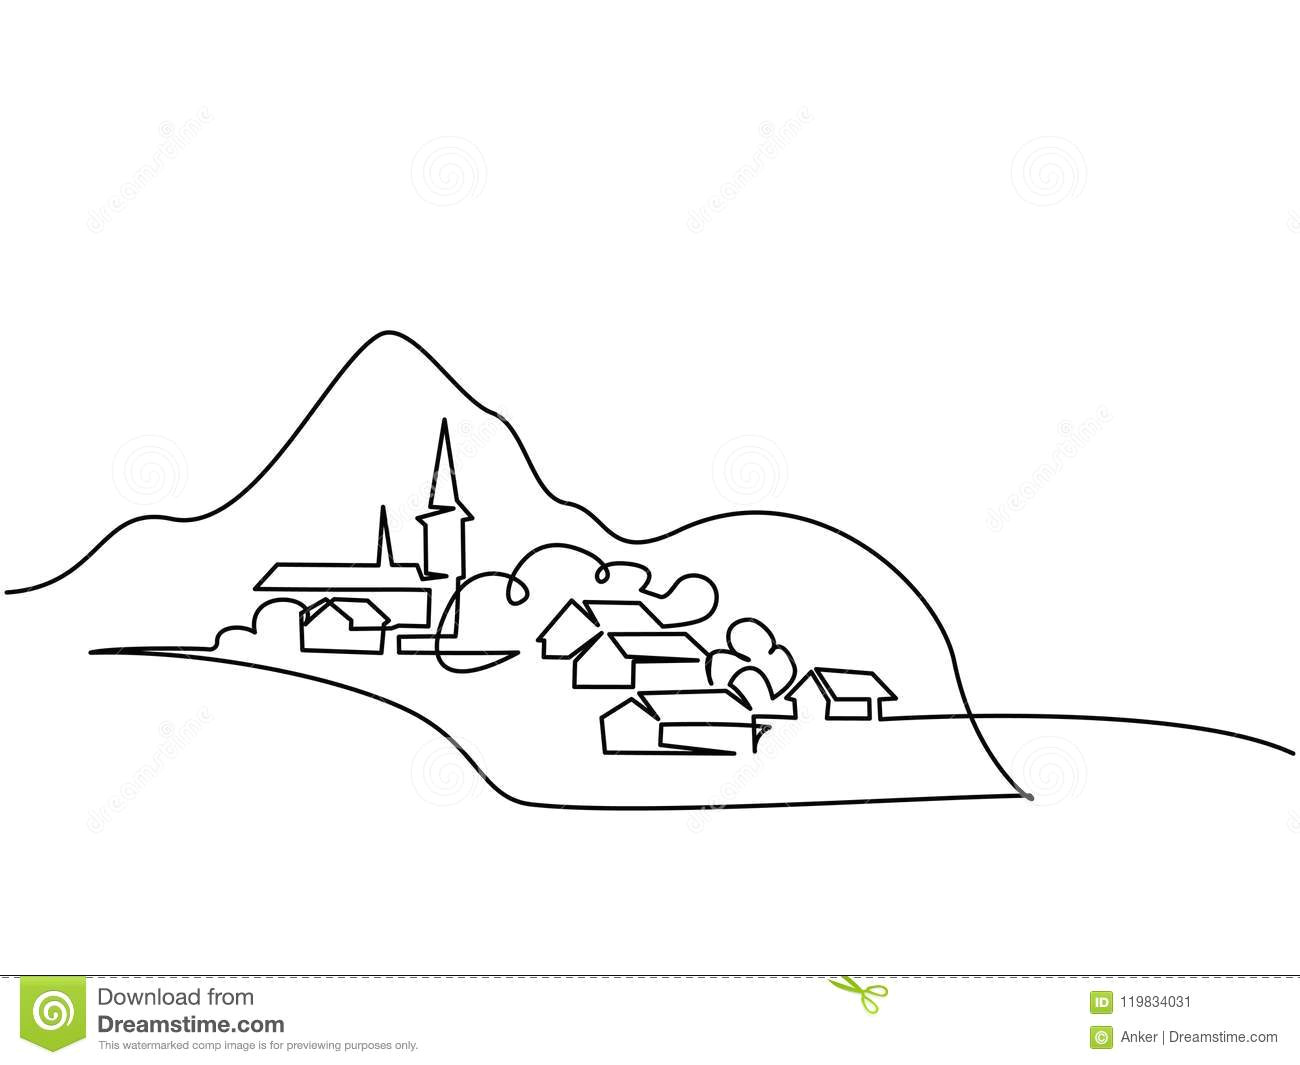 Drawing Cartoon Landscapes Landscape with Village On Hill Stock Vector Illustration Of Land